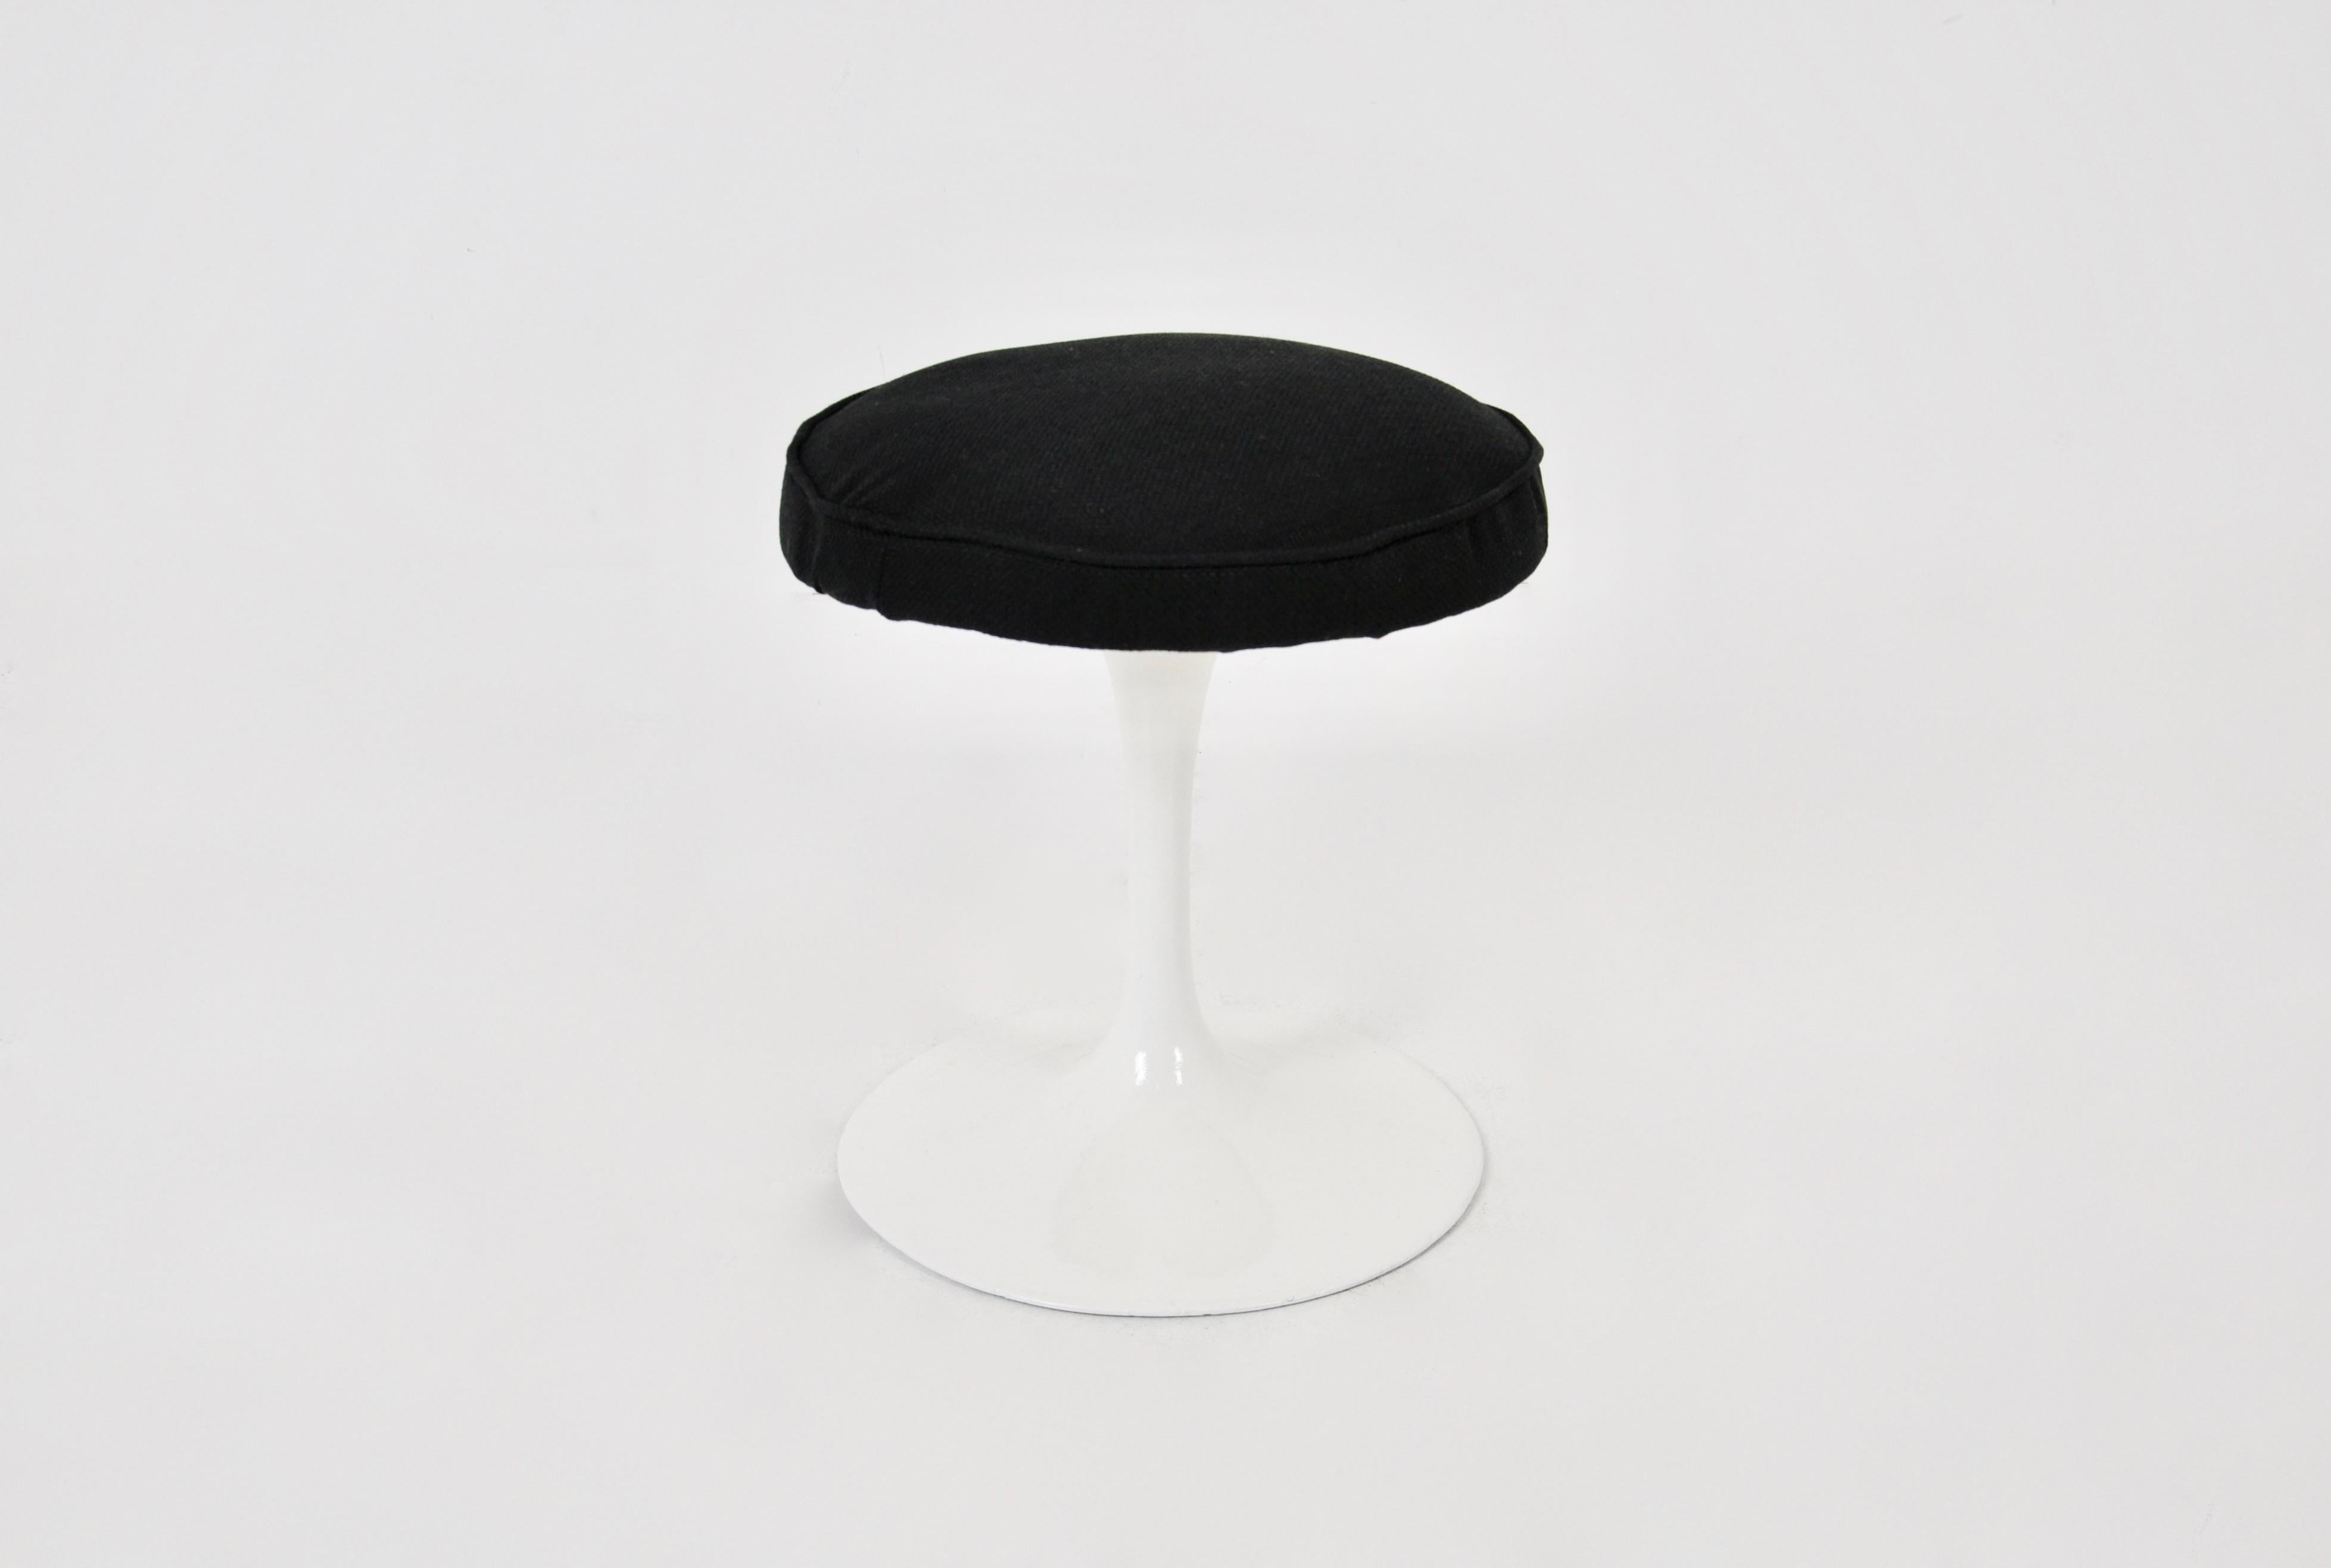 Stool stamped Knoll International. 
Cast aluminium base, 
Wear due to time and use of the stool.